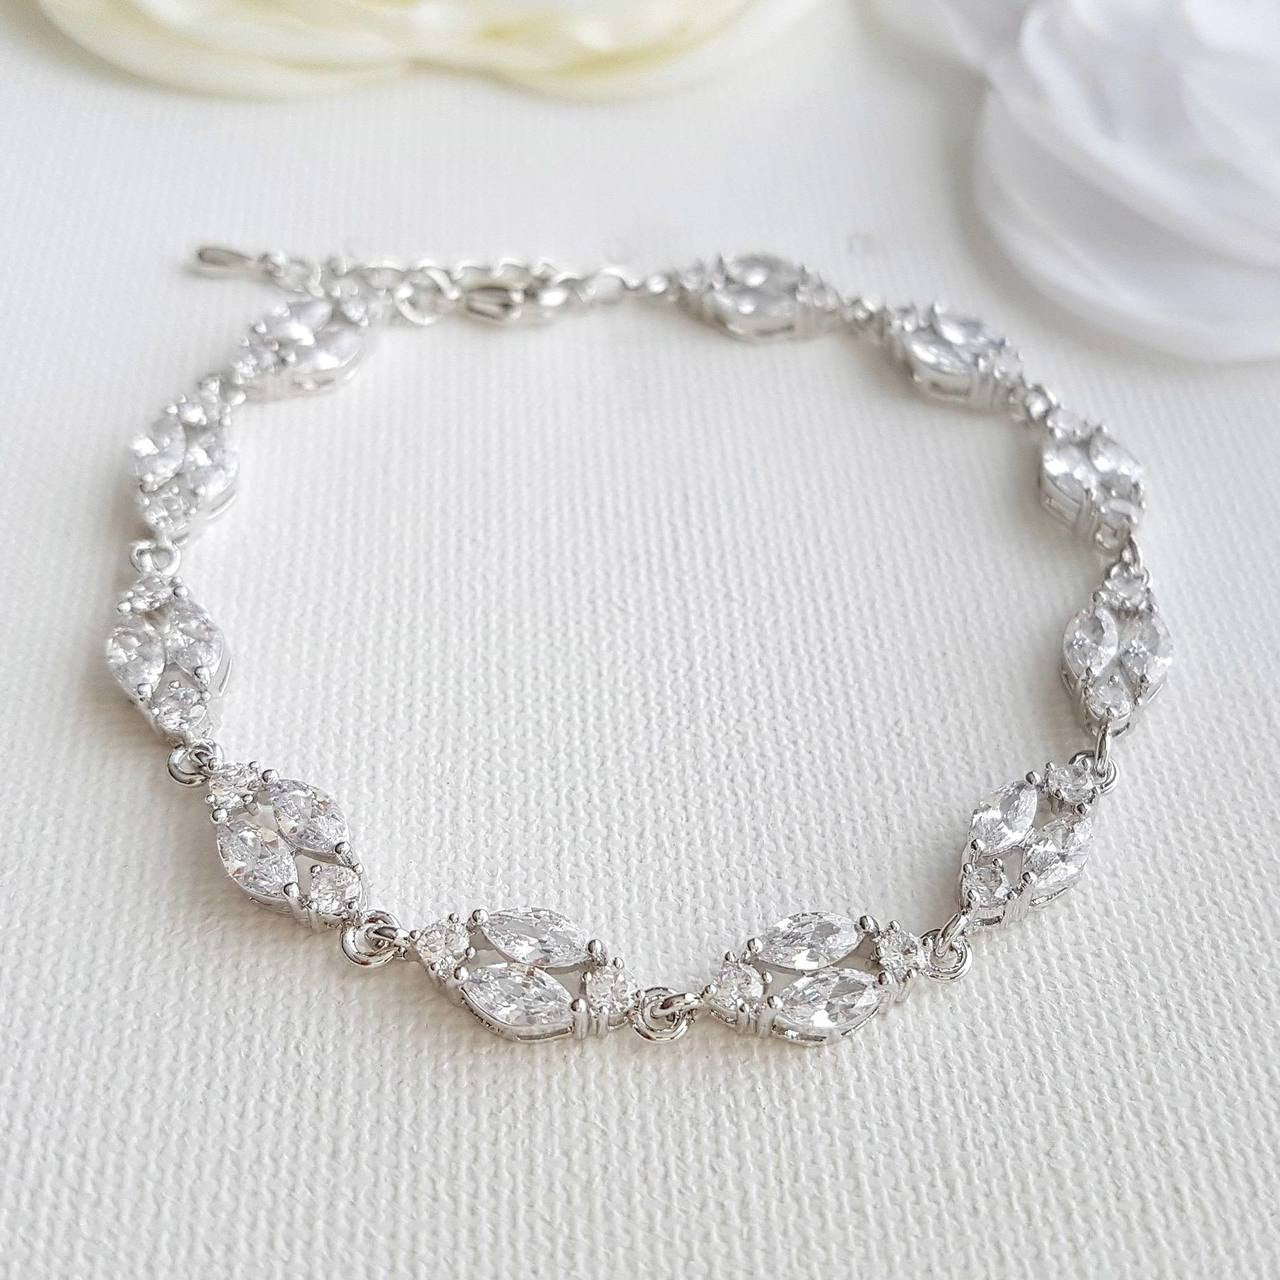 Dainty Rose Gold Crystal Bracelet for Weddings and Brides-Hayley